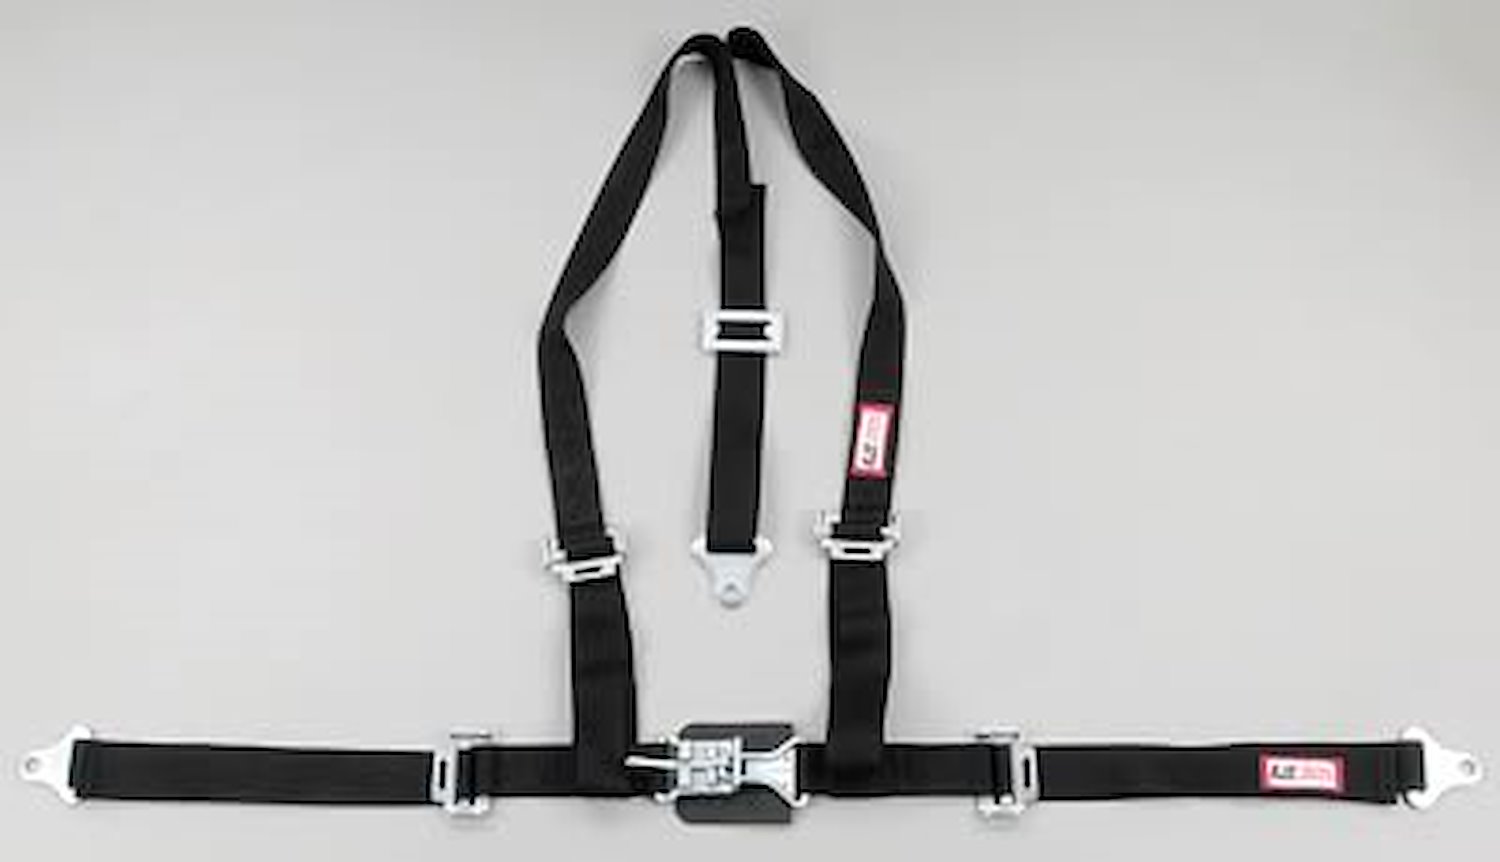 NON-SFI L&L HARNESS 3 PULL DOWN Lap Belt w/adjuster 2 S.H. Y FLOOR Mount ALL WRAP ENDS RED